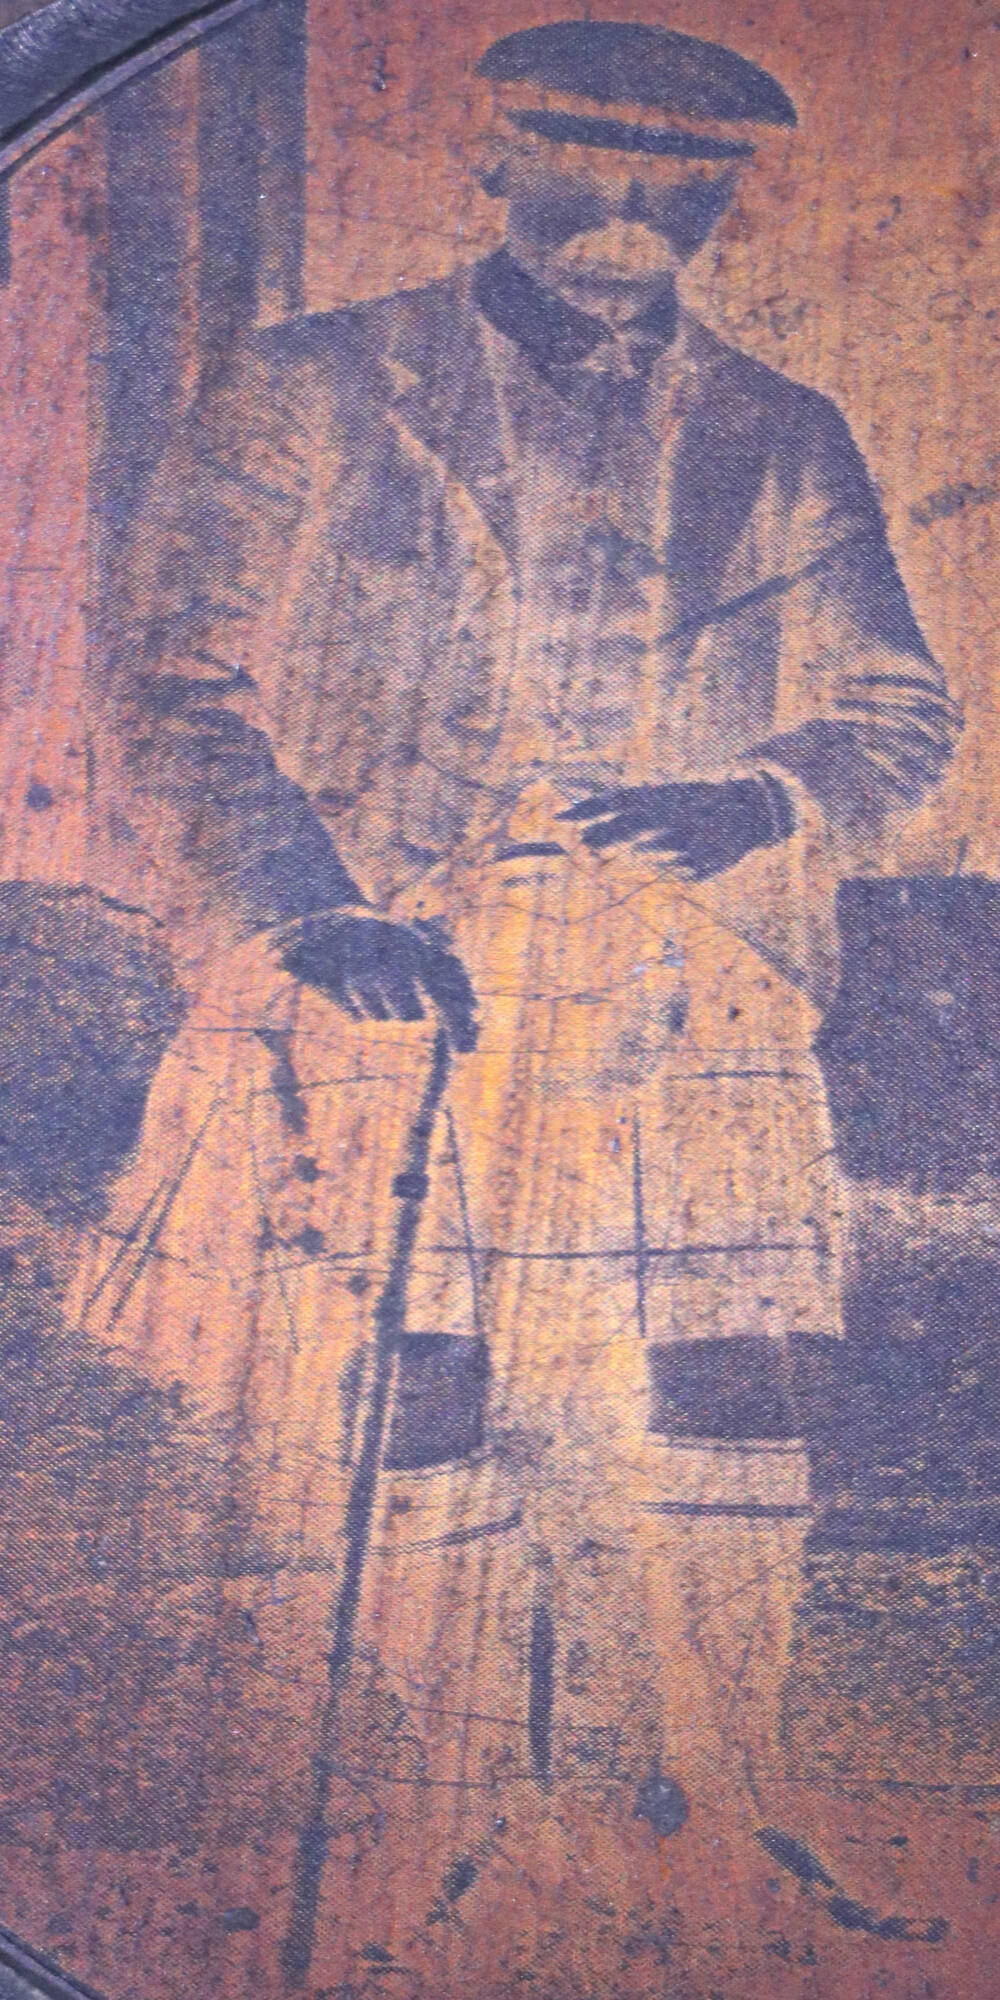 Negative image of a kilted man, holding a walking stick